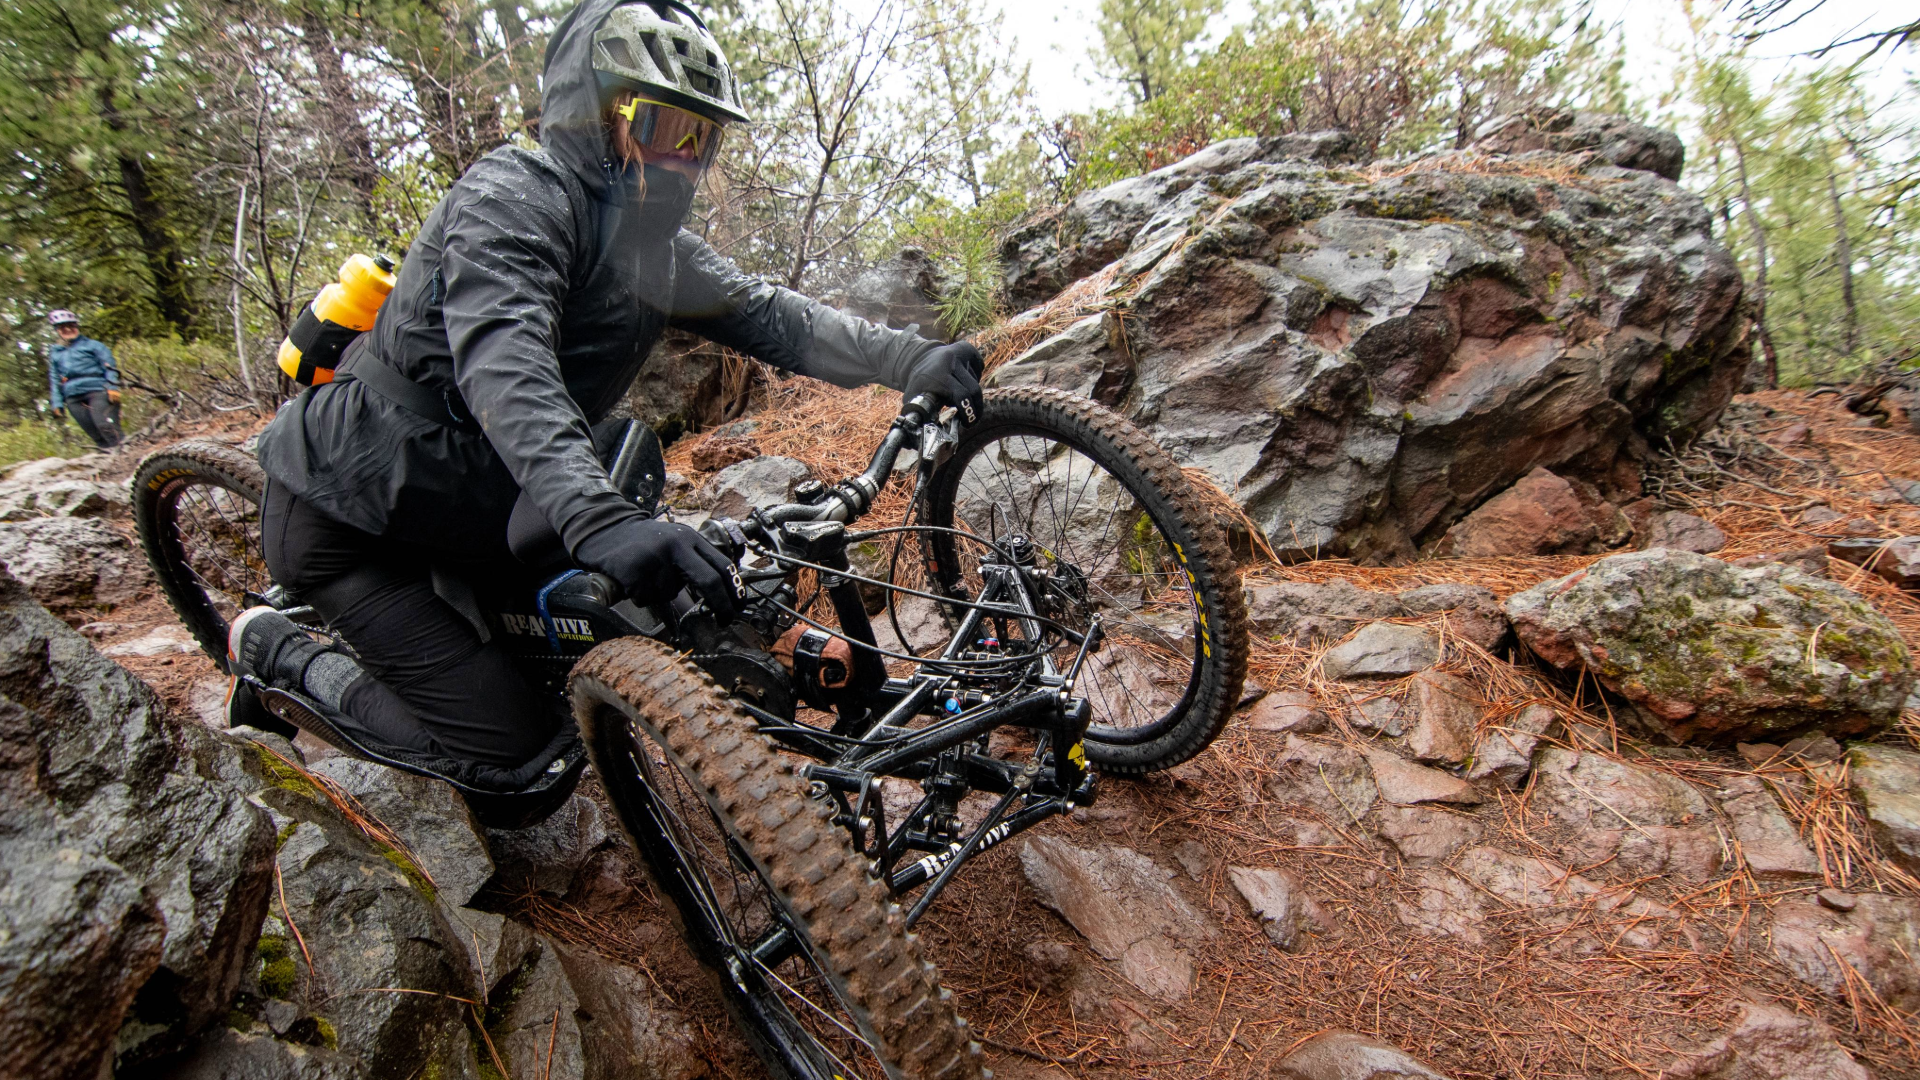 an athlete in aMTB handcycle navigates the large boulders on the trail.